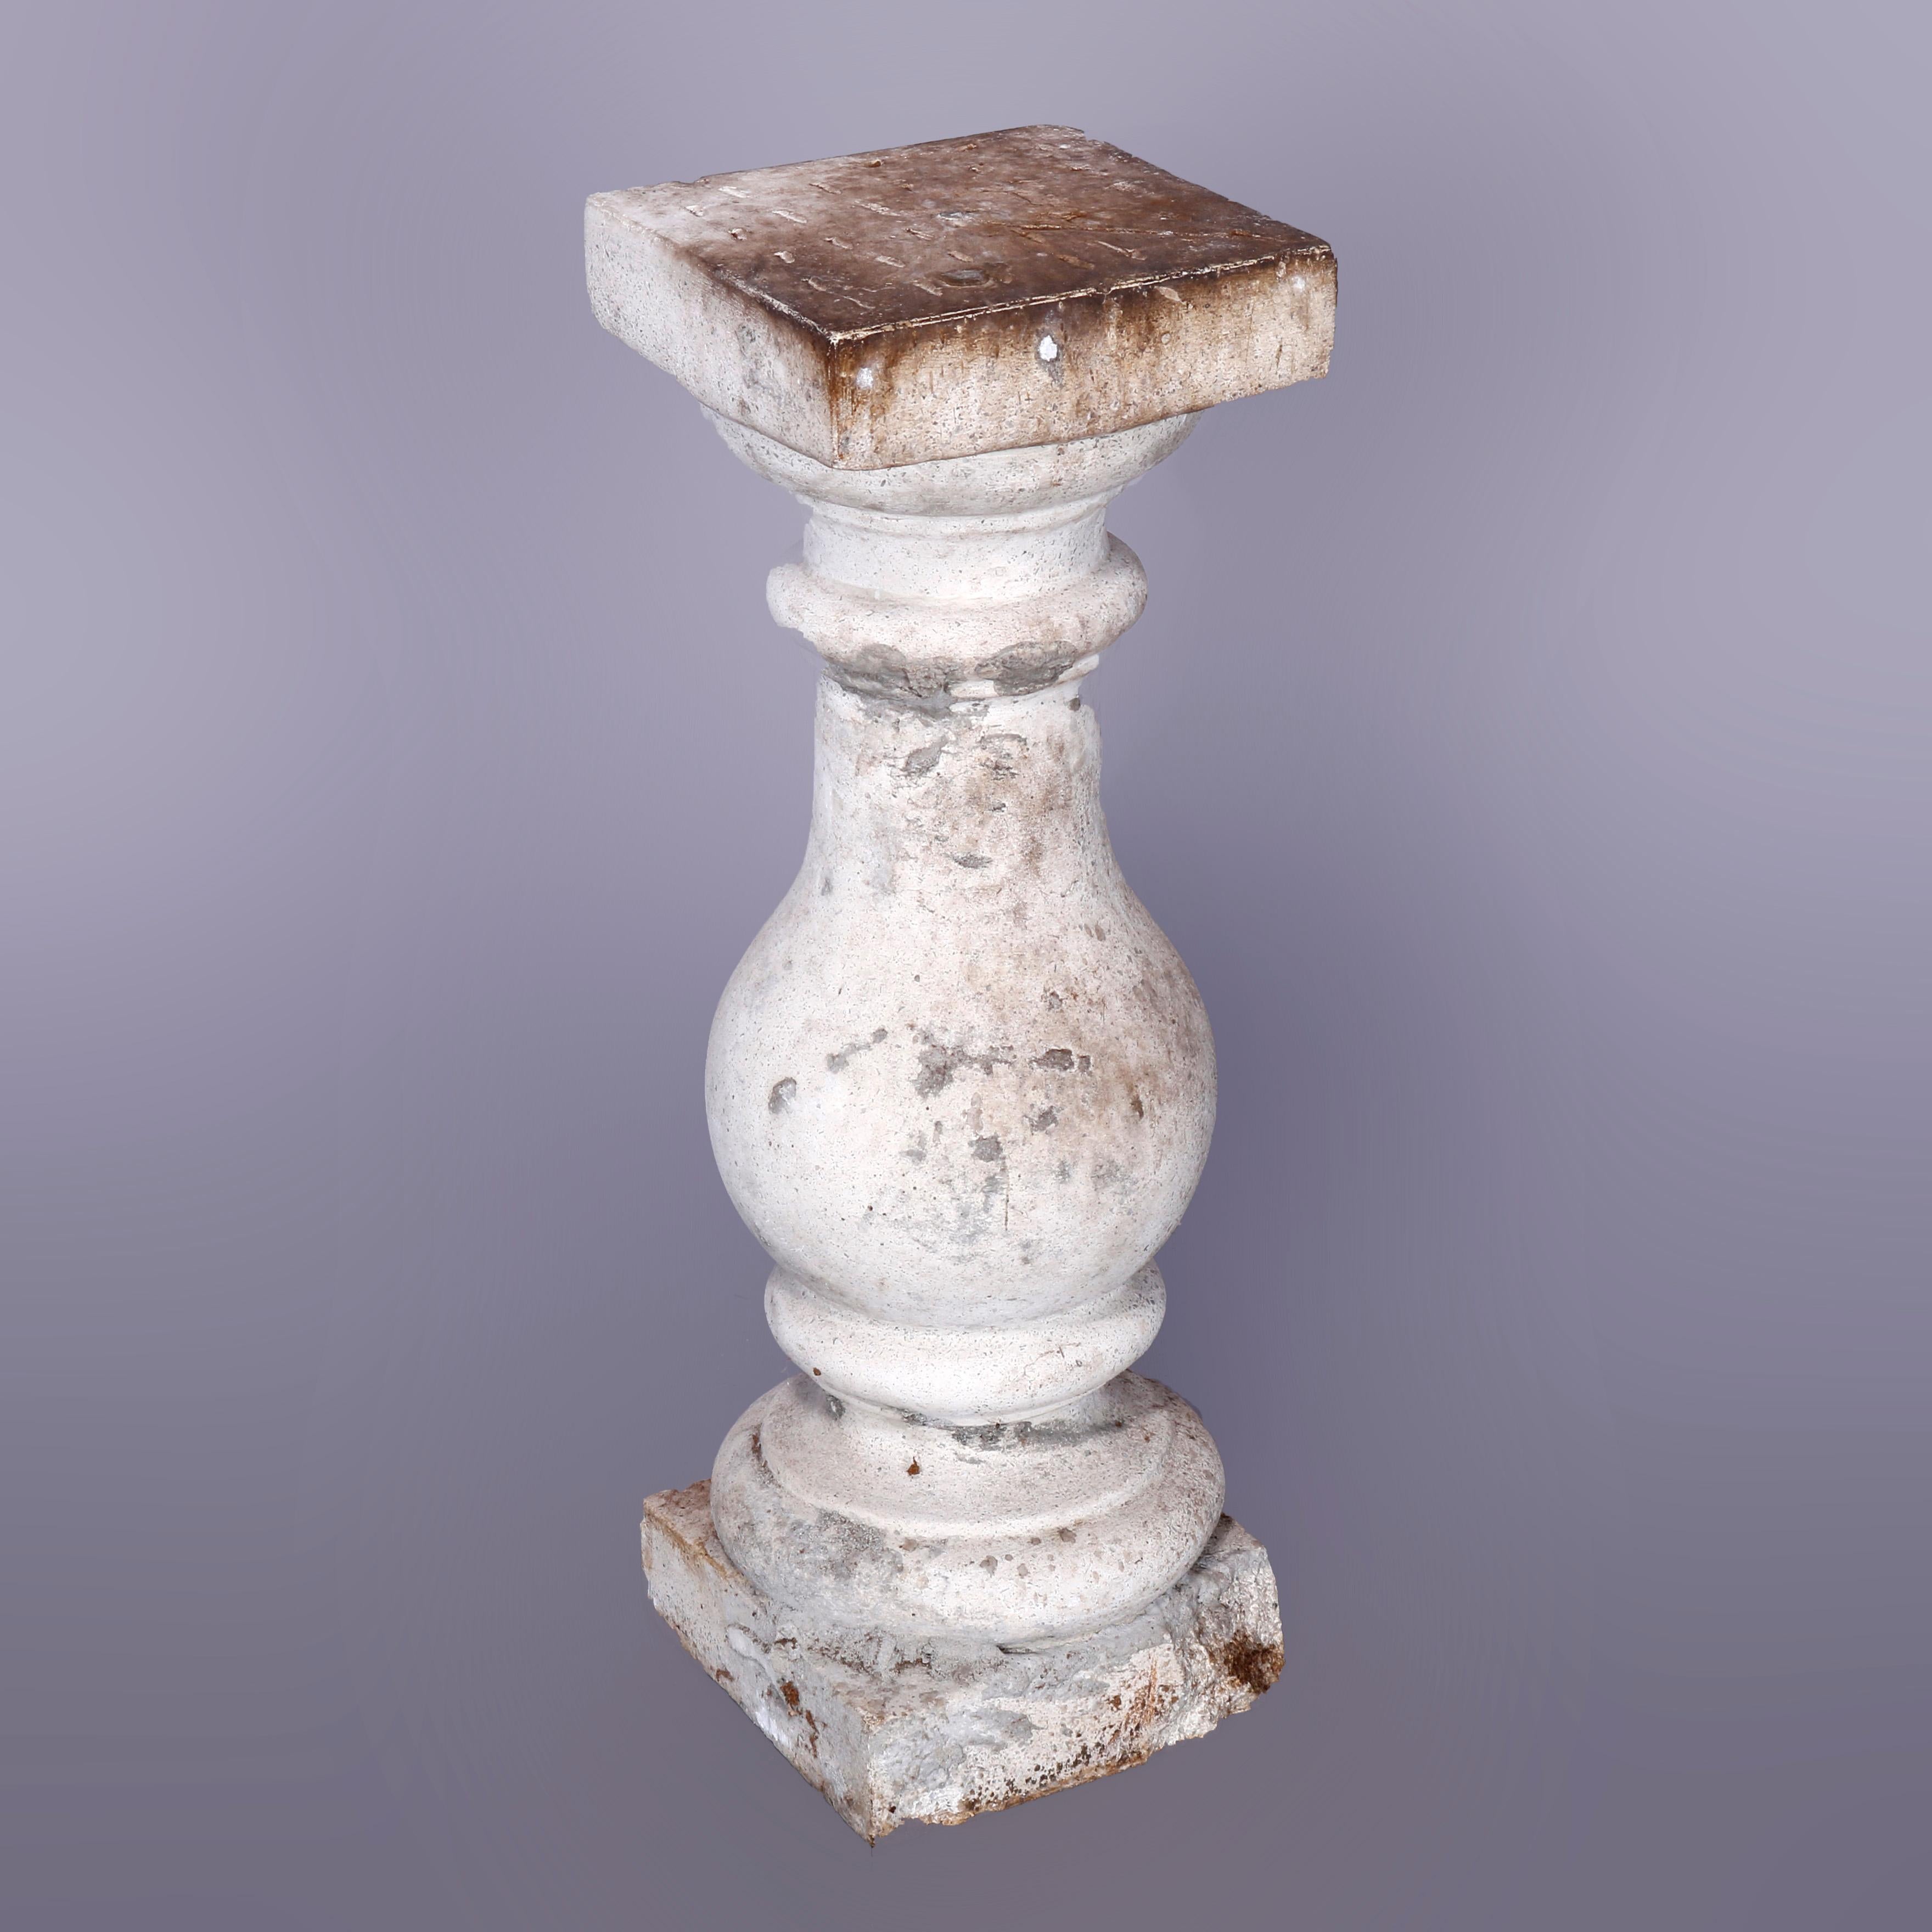 A classical balustrade pedestal offers cast hard stone construction in column form with square sculpture display, 20th century

Measures - 23.25'' H x 7.75'' W x 7.75'' D.

Catalogue Note: Ask about DISCOUNTED DELIVERY RATES available to most